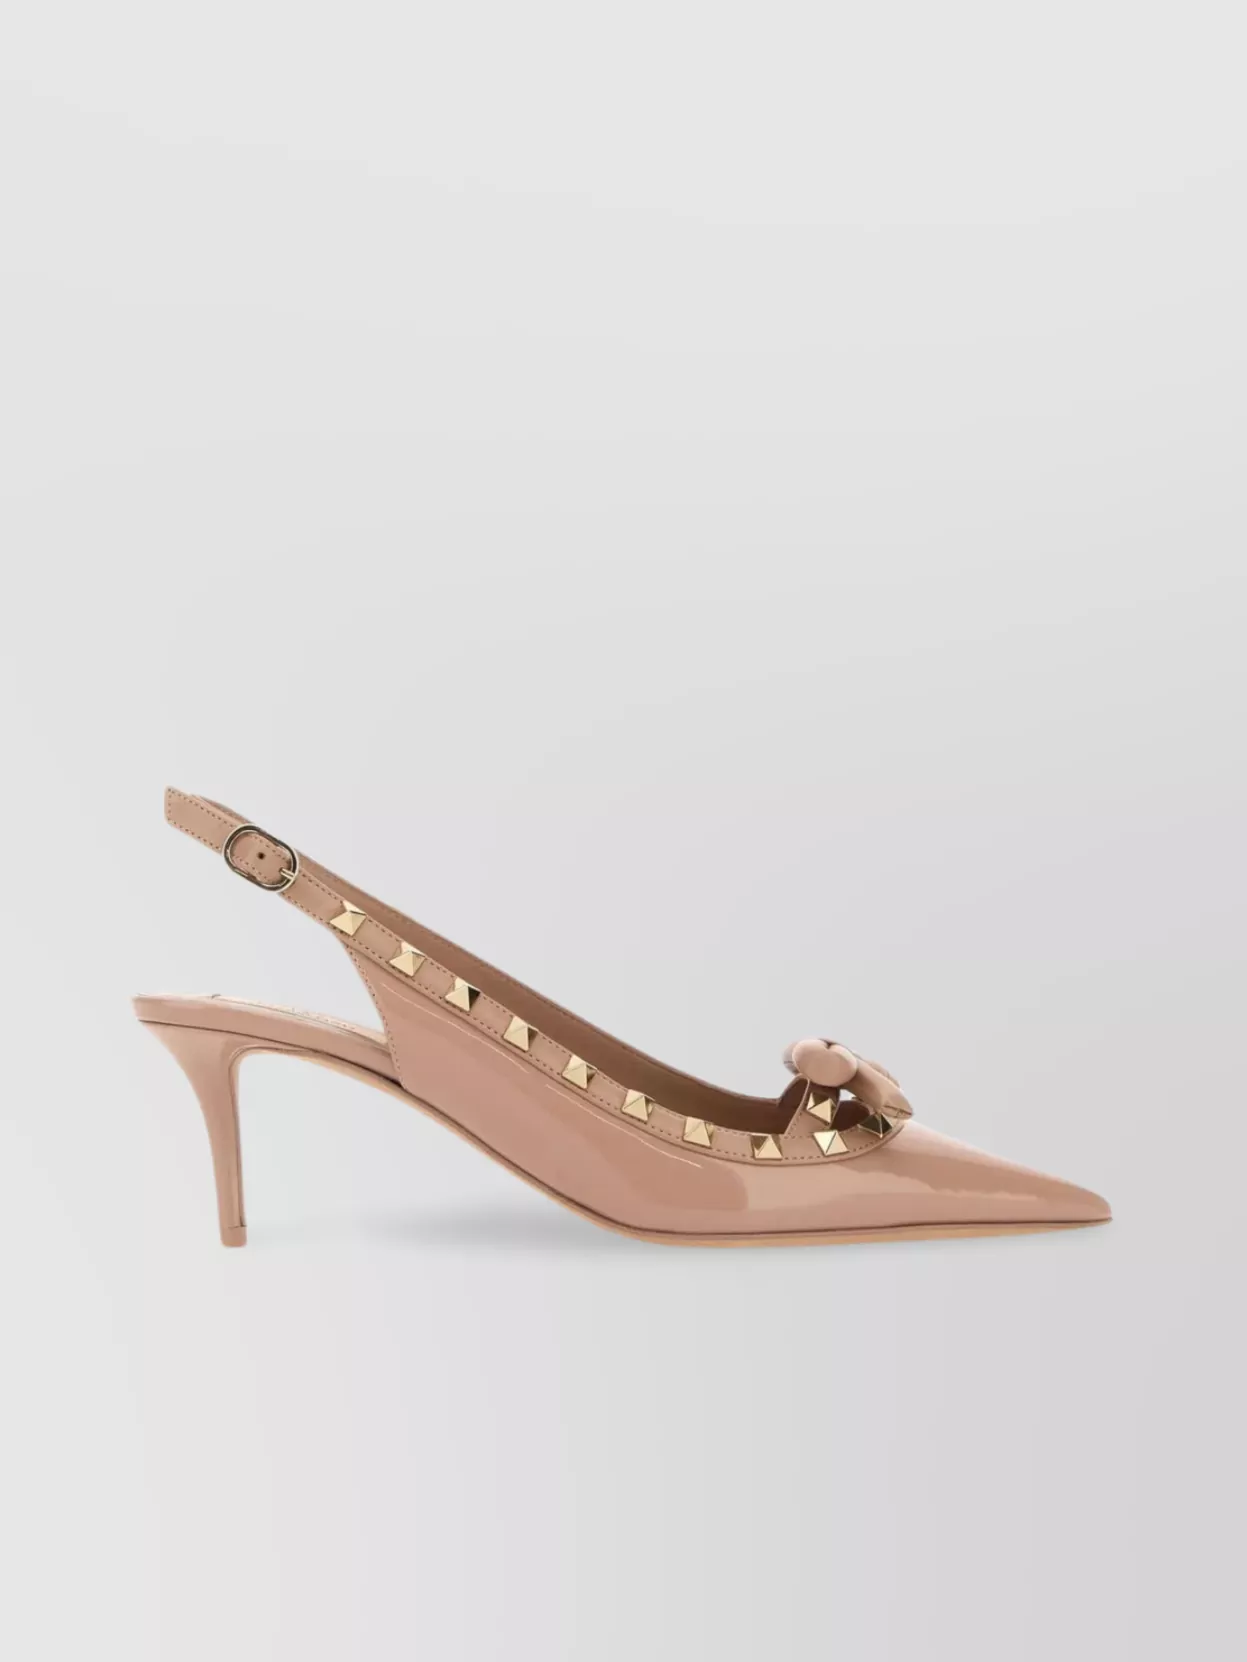 Shop Valentino Leather Pumps With Pointed Toe And Stiletto Heel In Beige